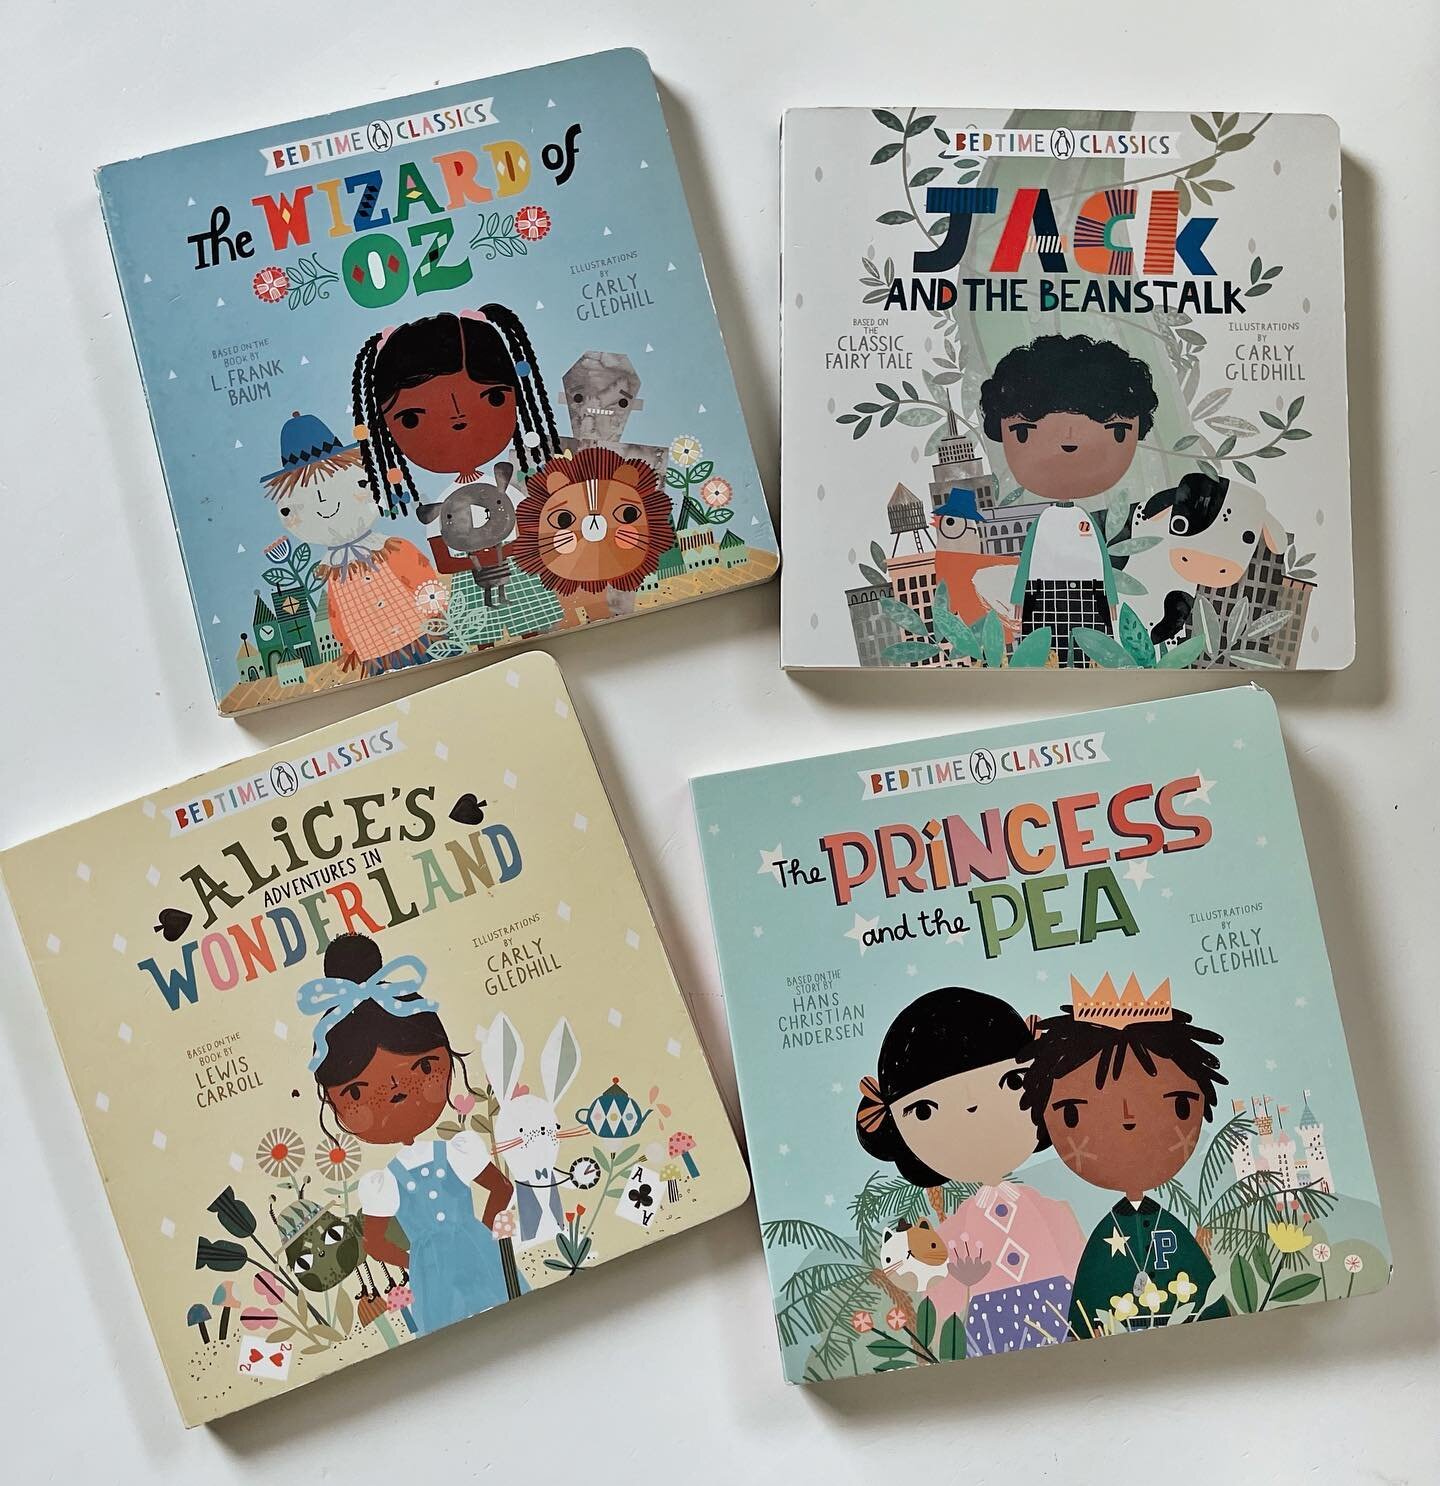 We love our book collection here at Our Open House! So we were thrilled to find this bedtime classics series that tells the stories we all know and love while featuring diverse lead characters.

Having inclusive books and toys in your home is just on